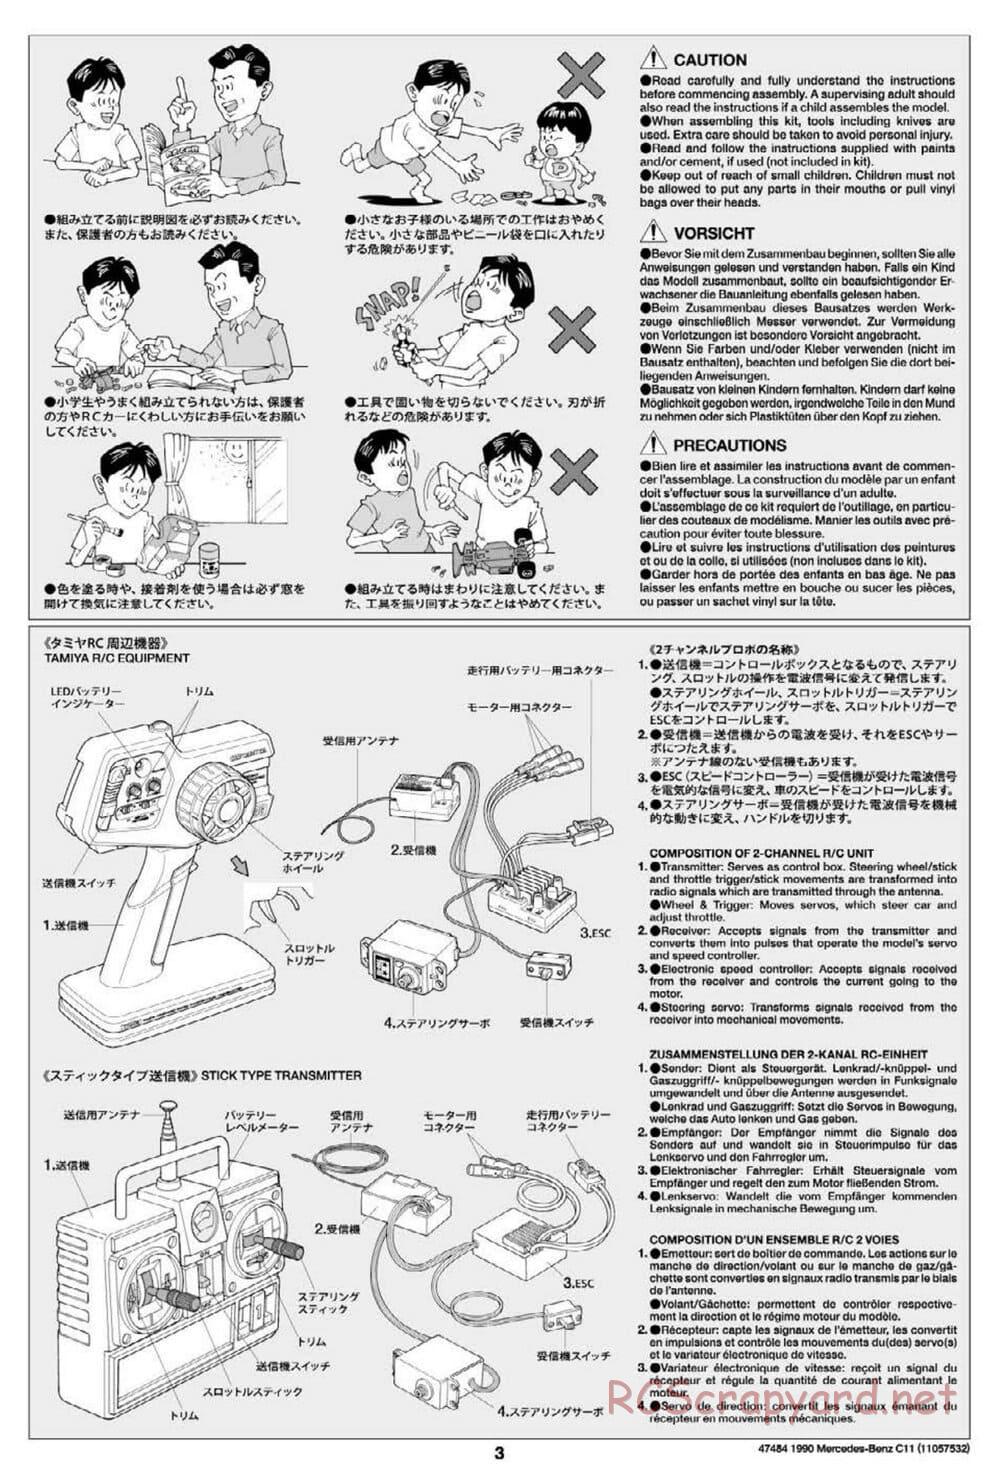 Tamiya - 1990 Mercedes-Benz C11 - Group-C Chassis - Manual - Page 3